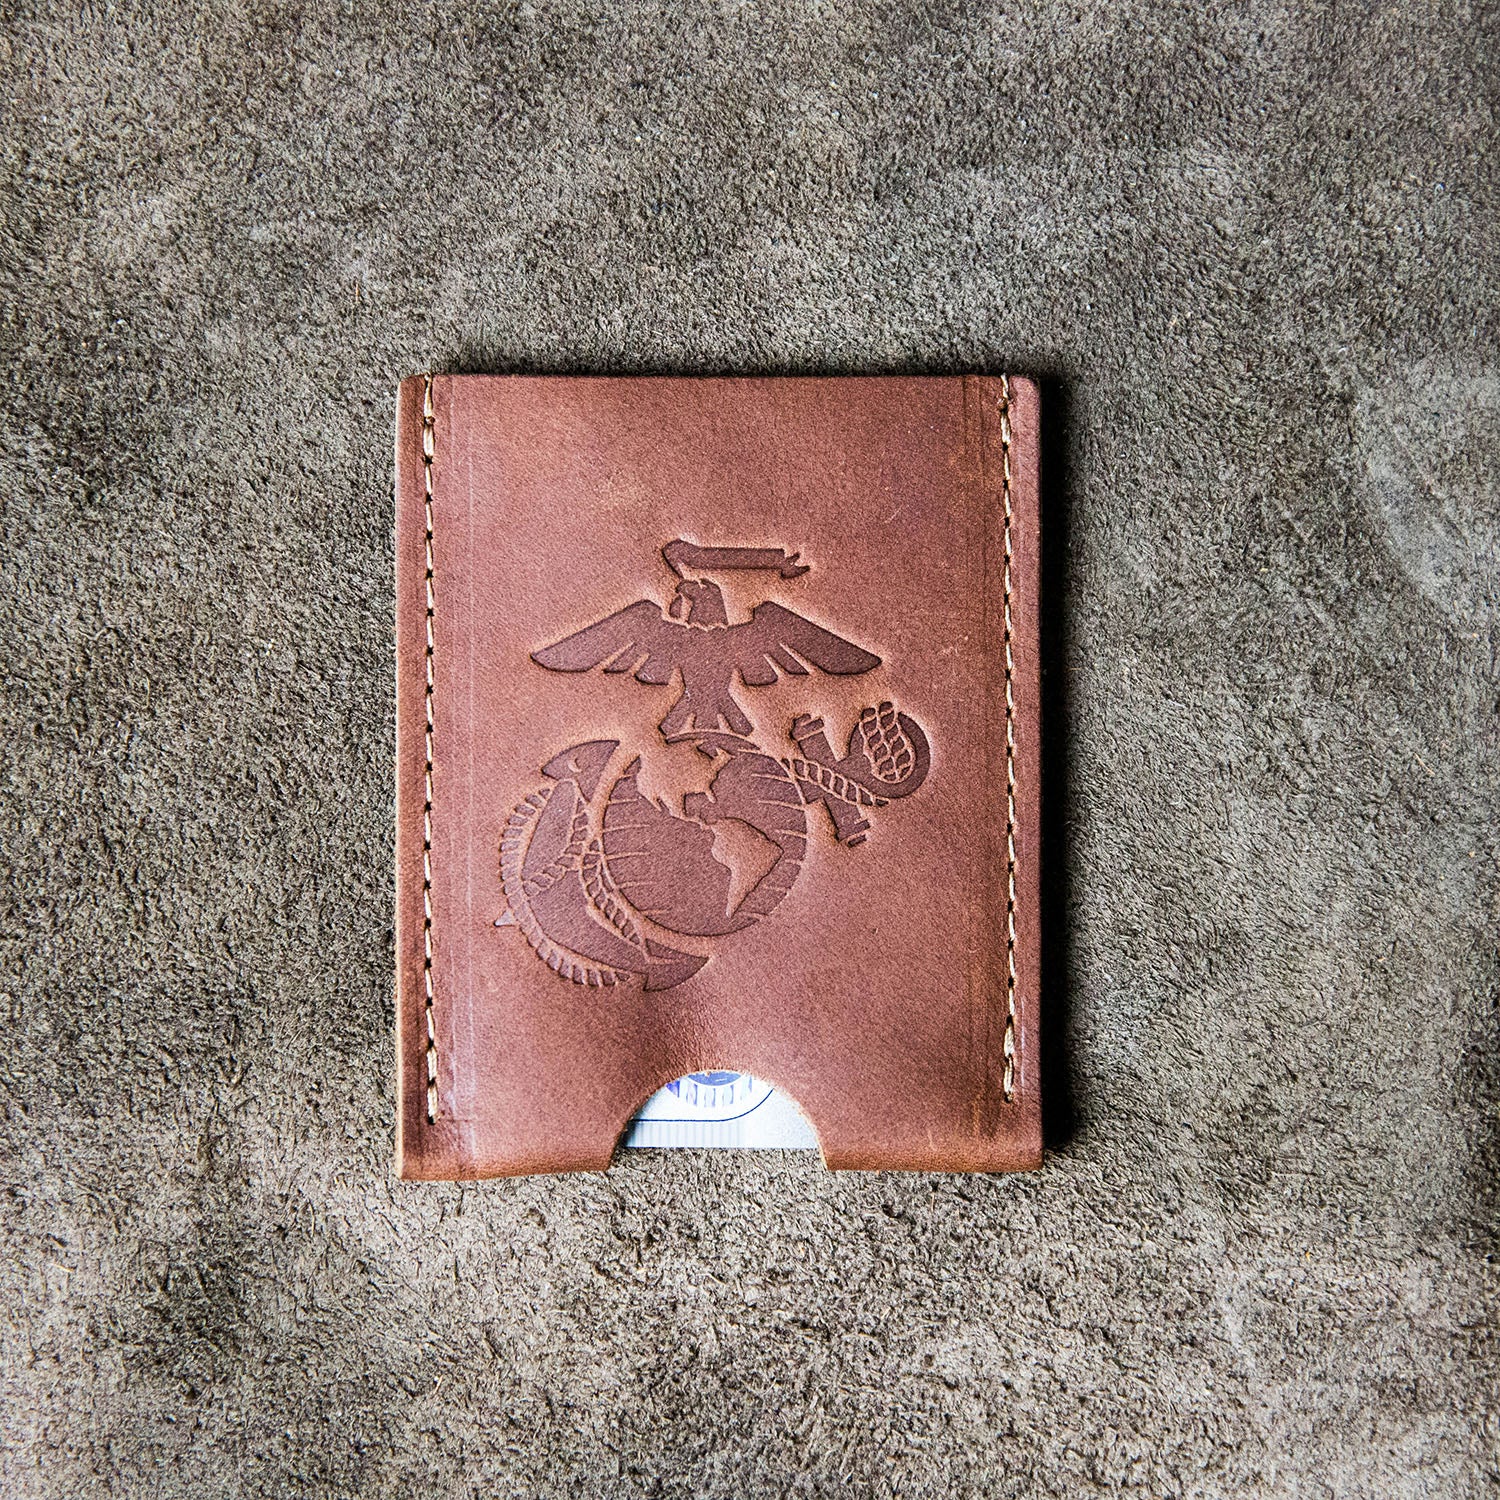 Fine leather card holder wallet with marine corps logo